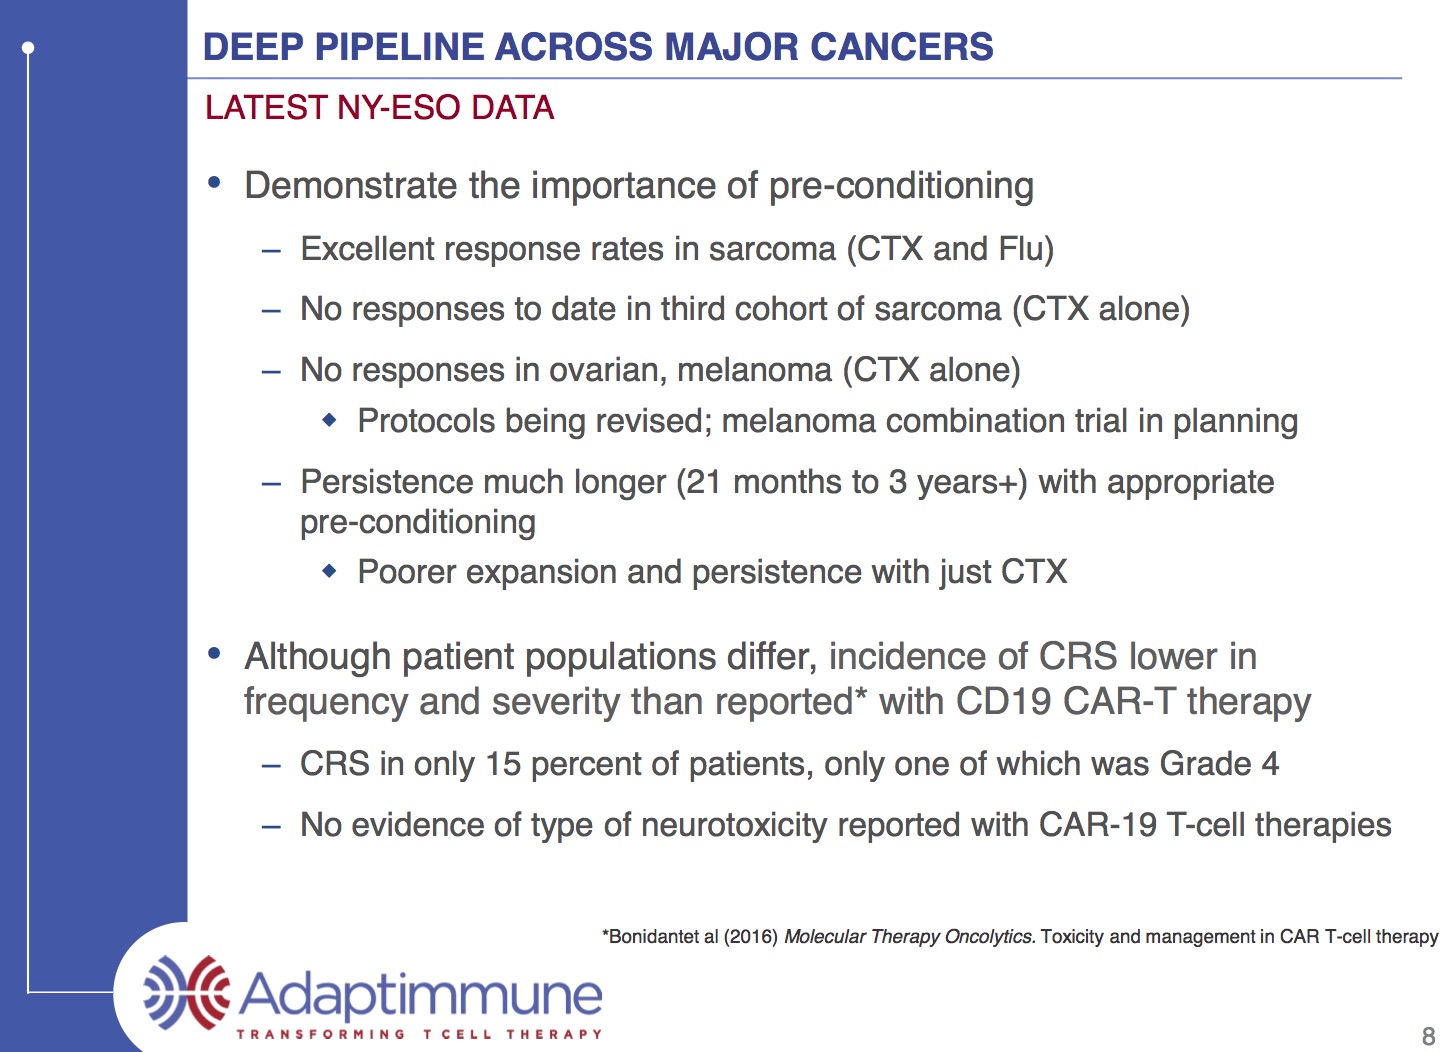 ADAP: Adaptimmune - Transforming T-Cell therapy 944928